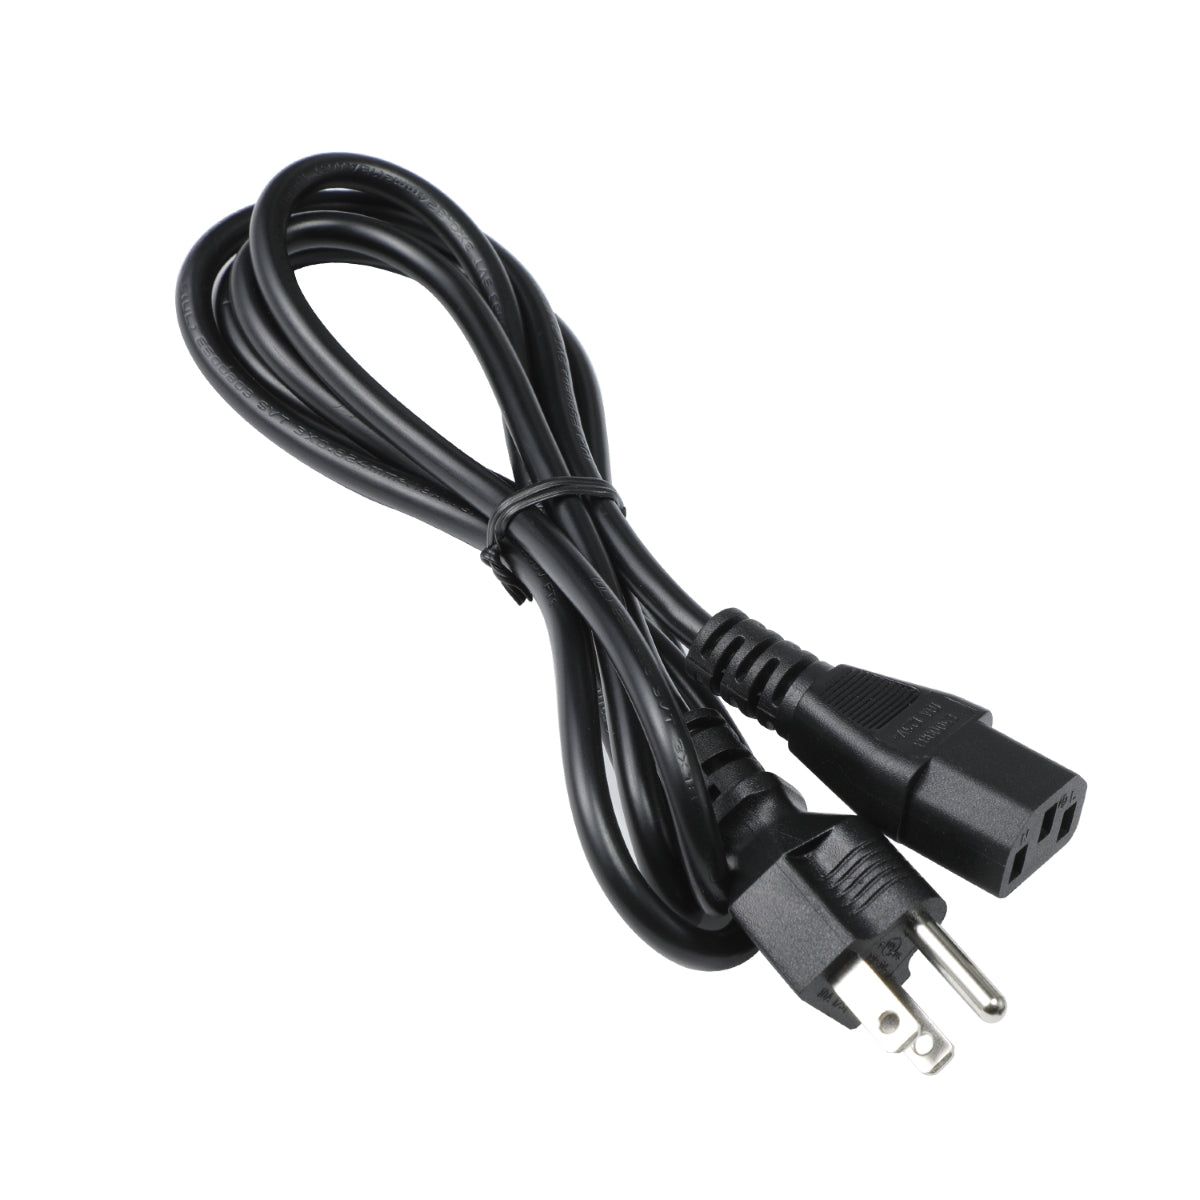 Power Cord for ViewSonic TD1711 Monitor